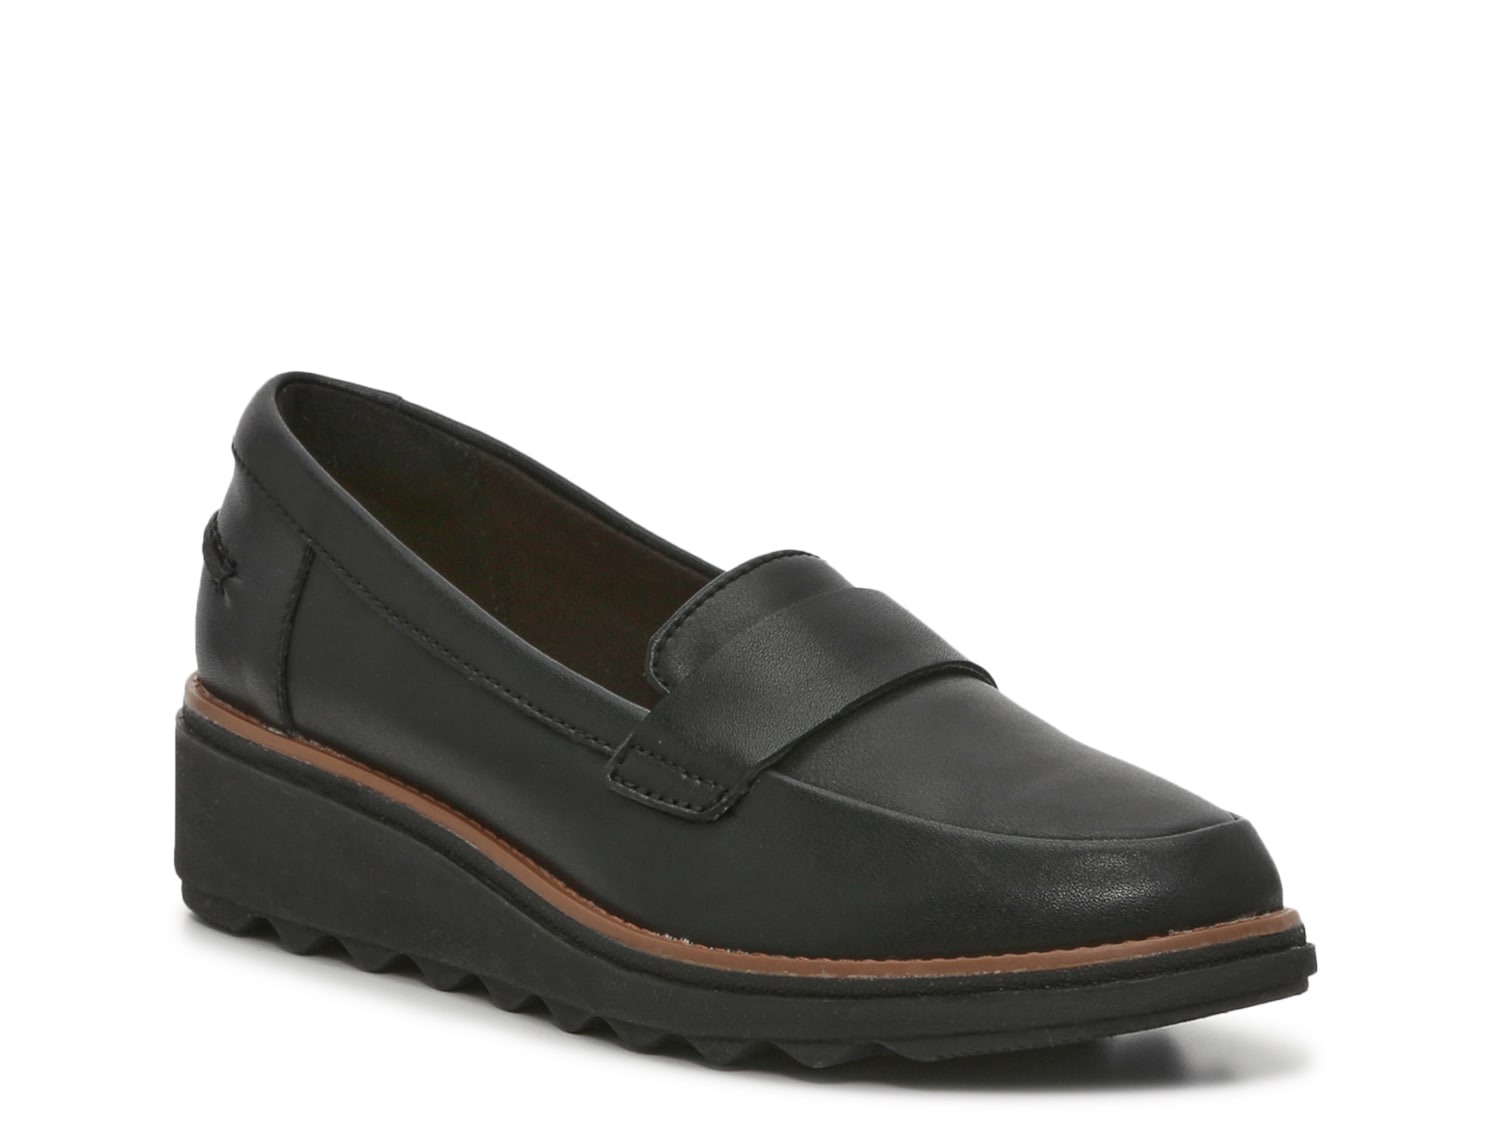 Clarks Sharon Gracie Wedge Loafer - Free Shipping | DSW